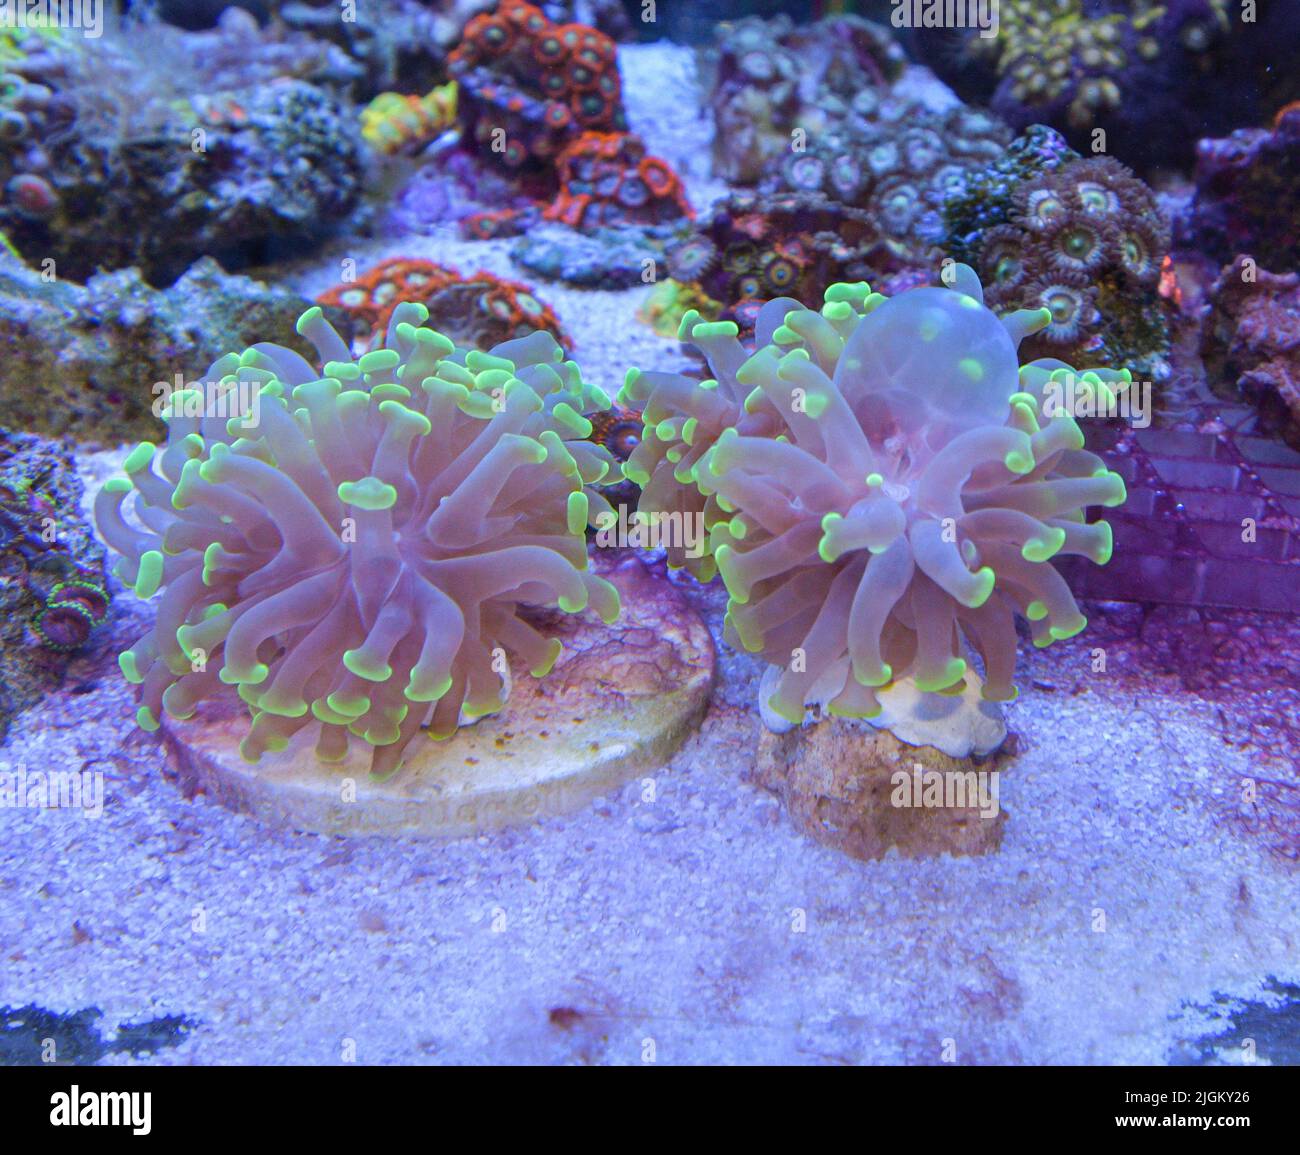 Reef tank, marine aquarium with corals and fishes. Zoanthus polyps corals. Stock Photo